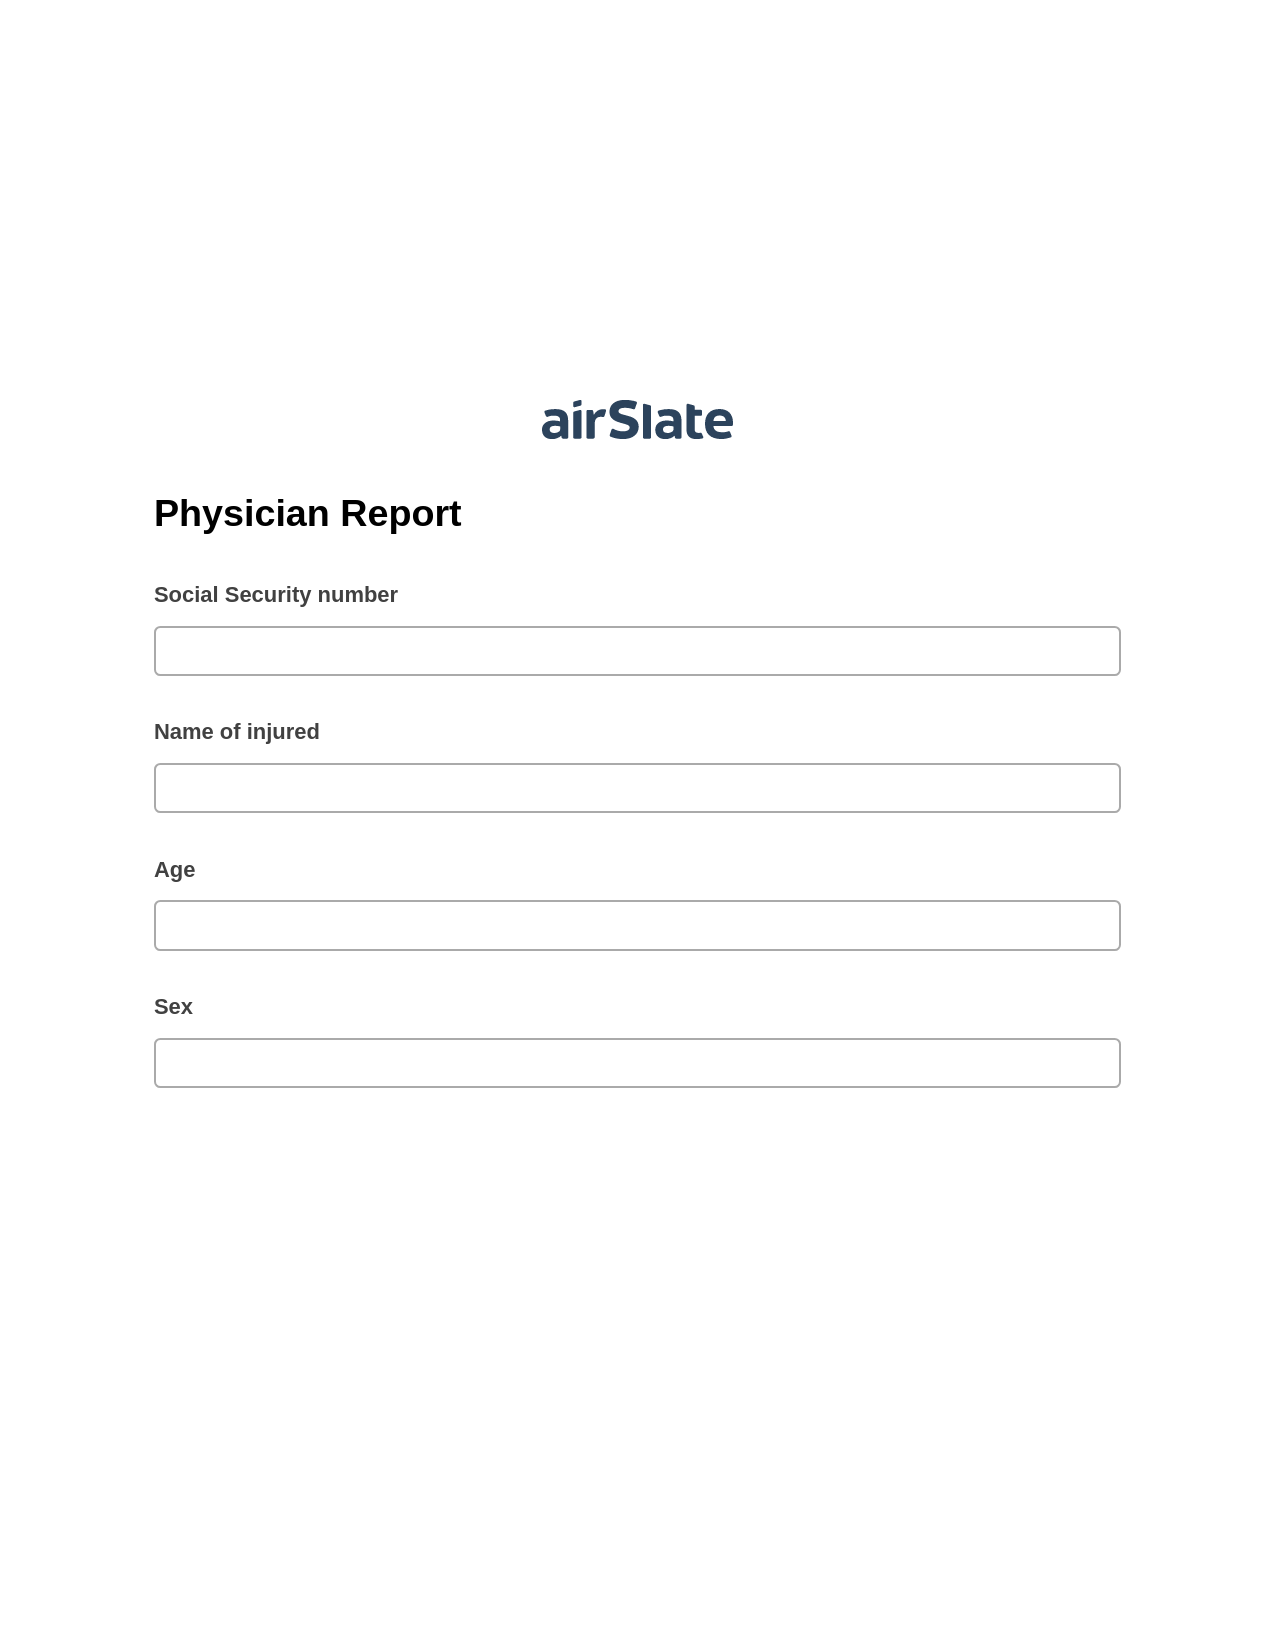 Physician Report Pre-fill from CSV File Bot, Export to MS Dynamics 365 Bot, Archive to Box Bot